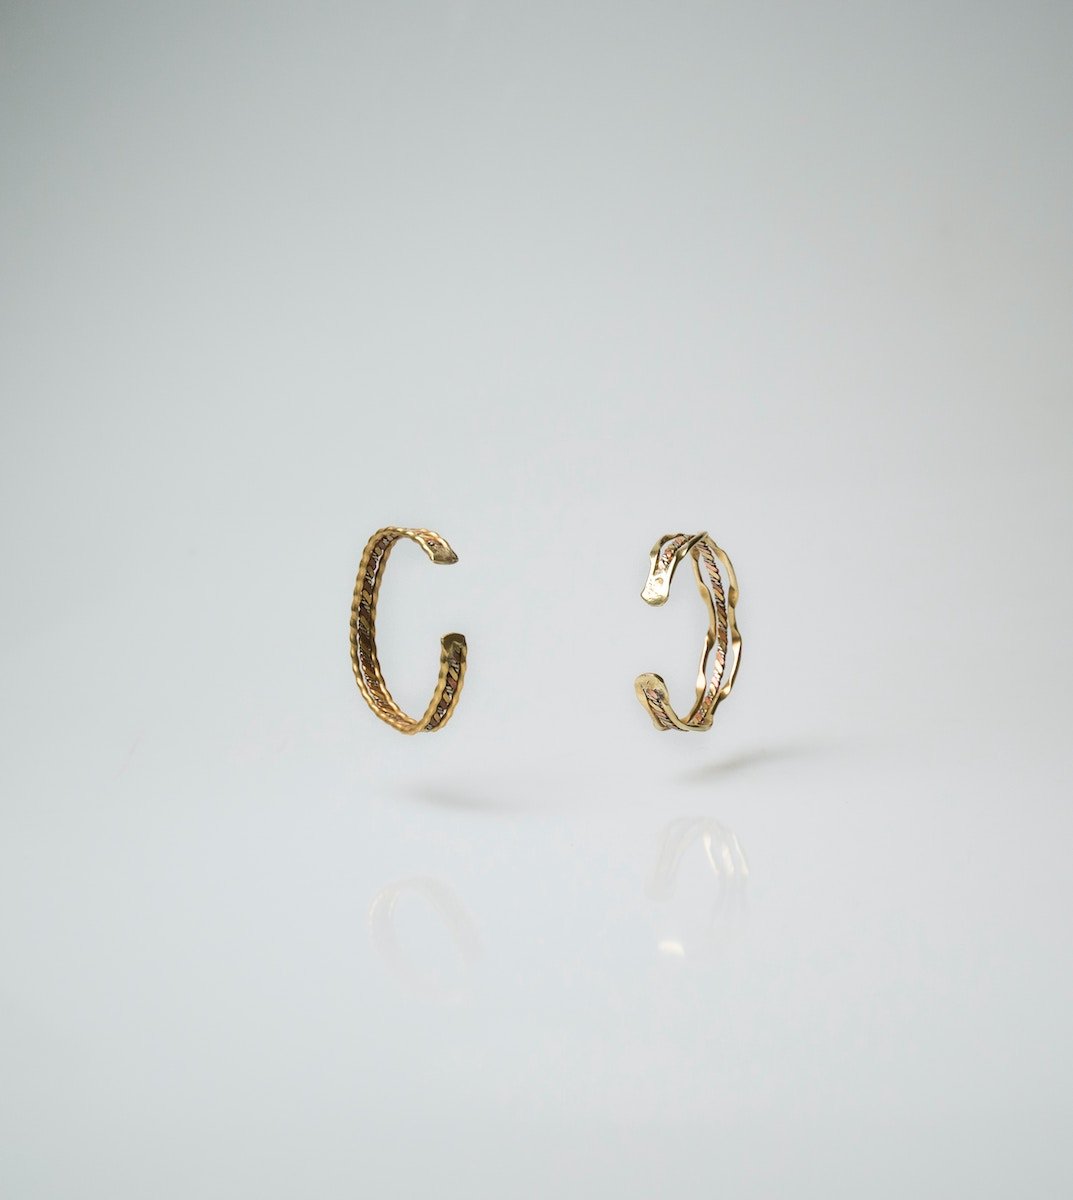 A DIY product photo of gold earrings over a white background